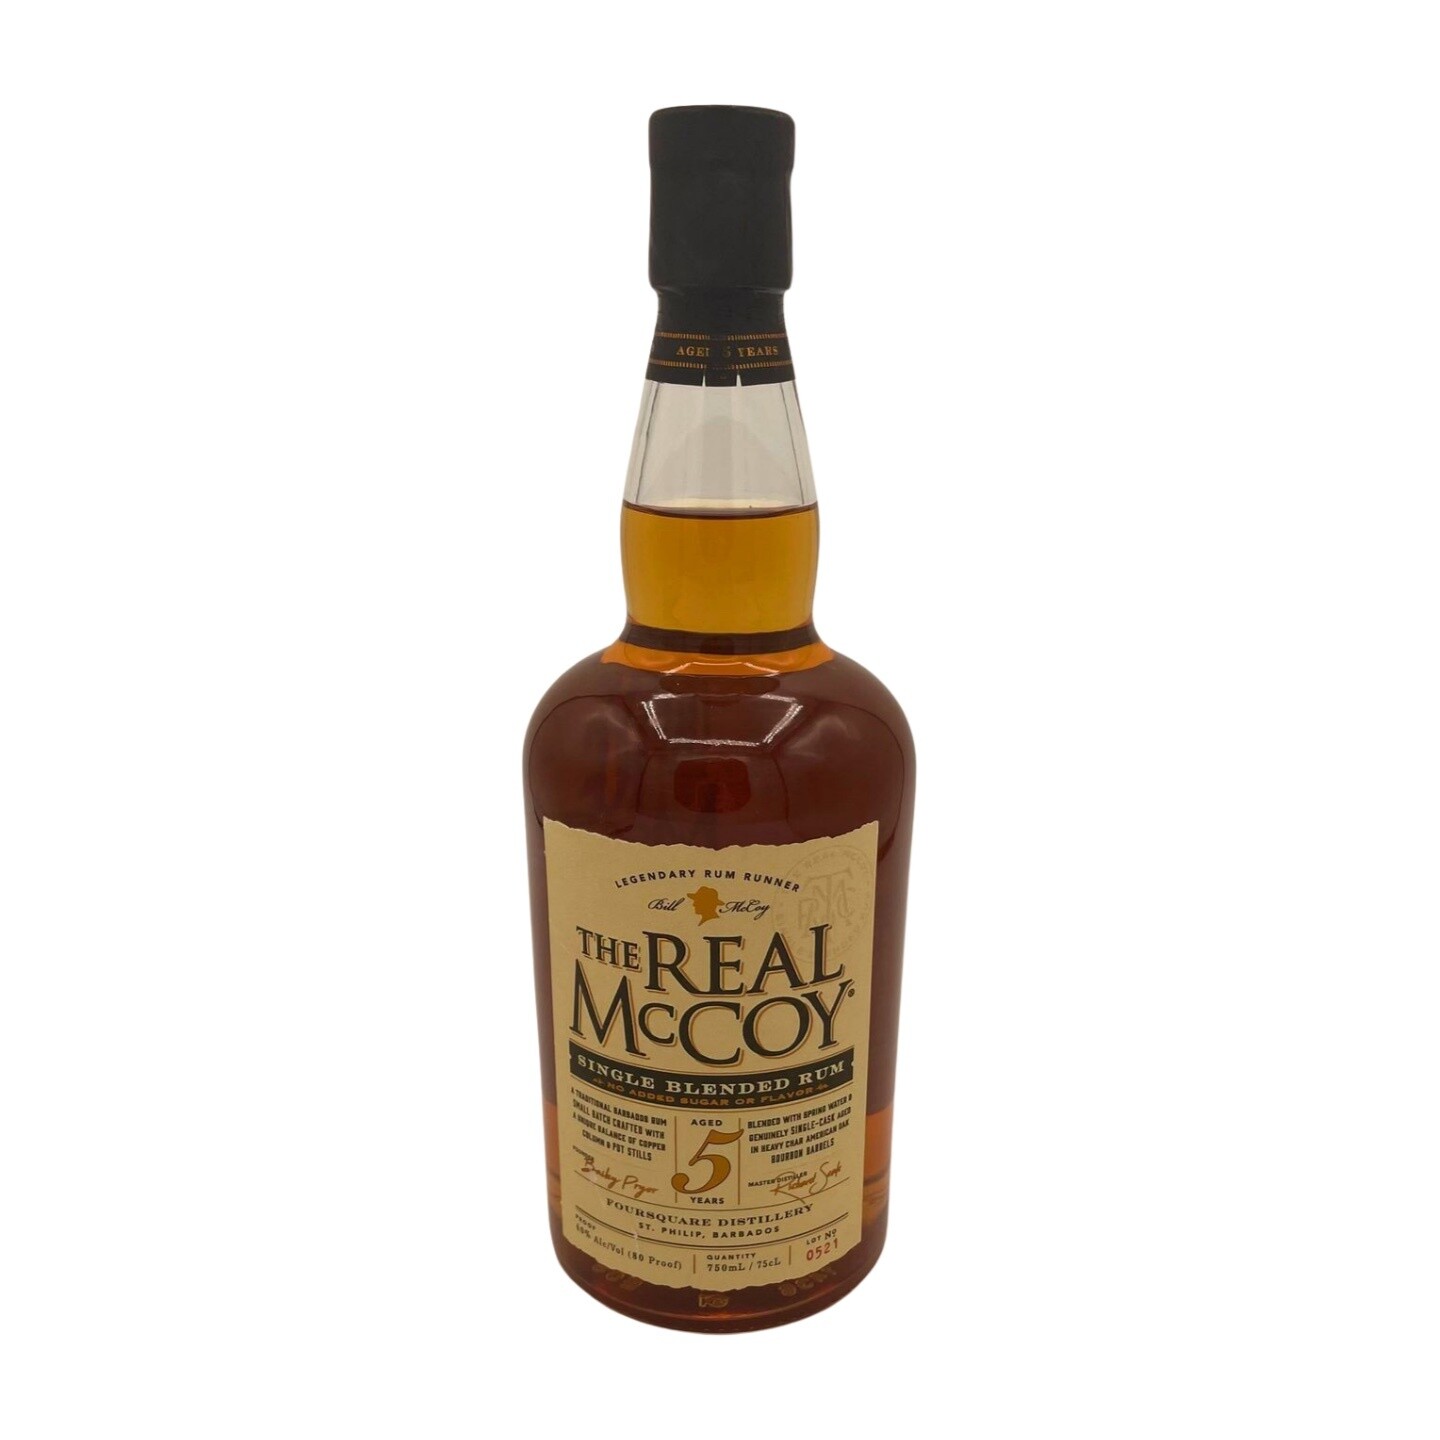 The Real McCoy 5 Years Old Single Blended Rum 80 Proof